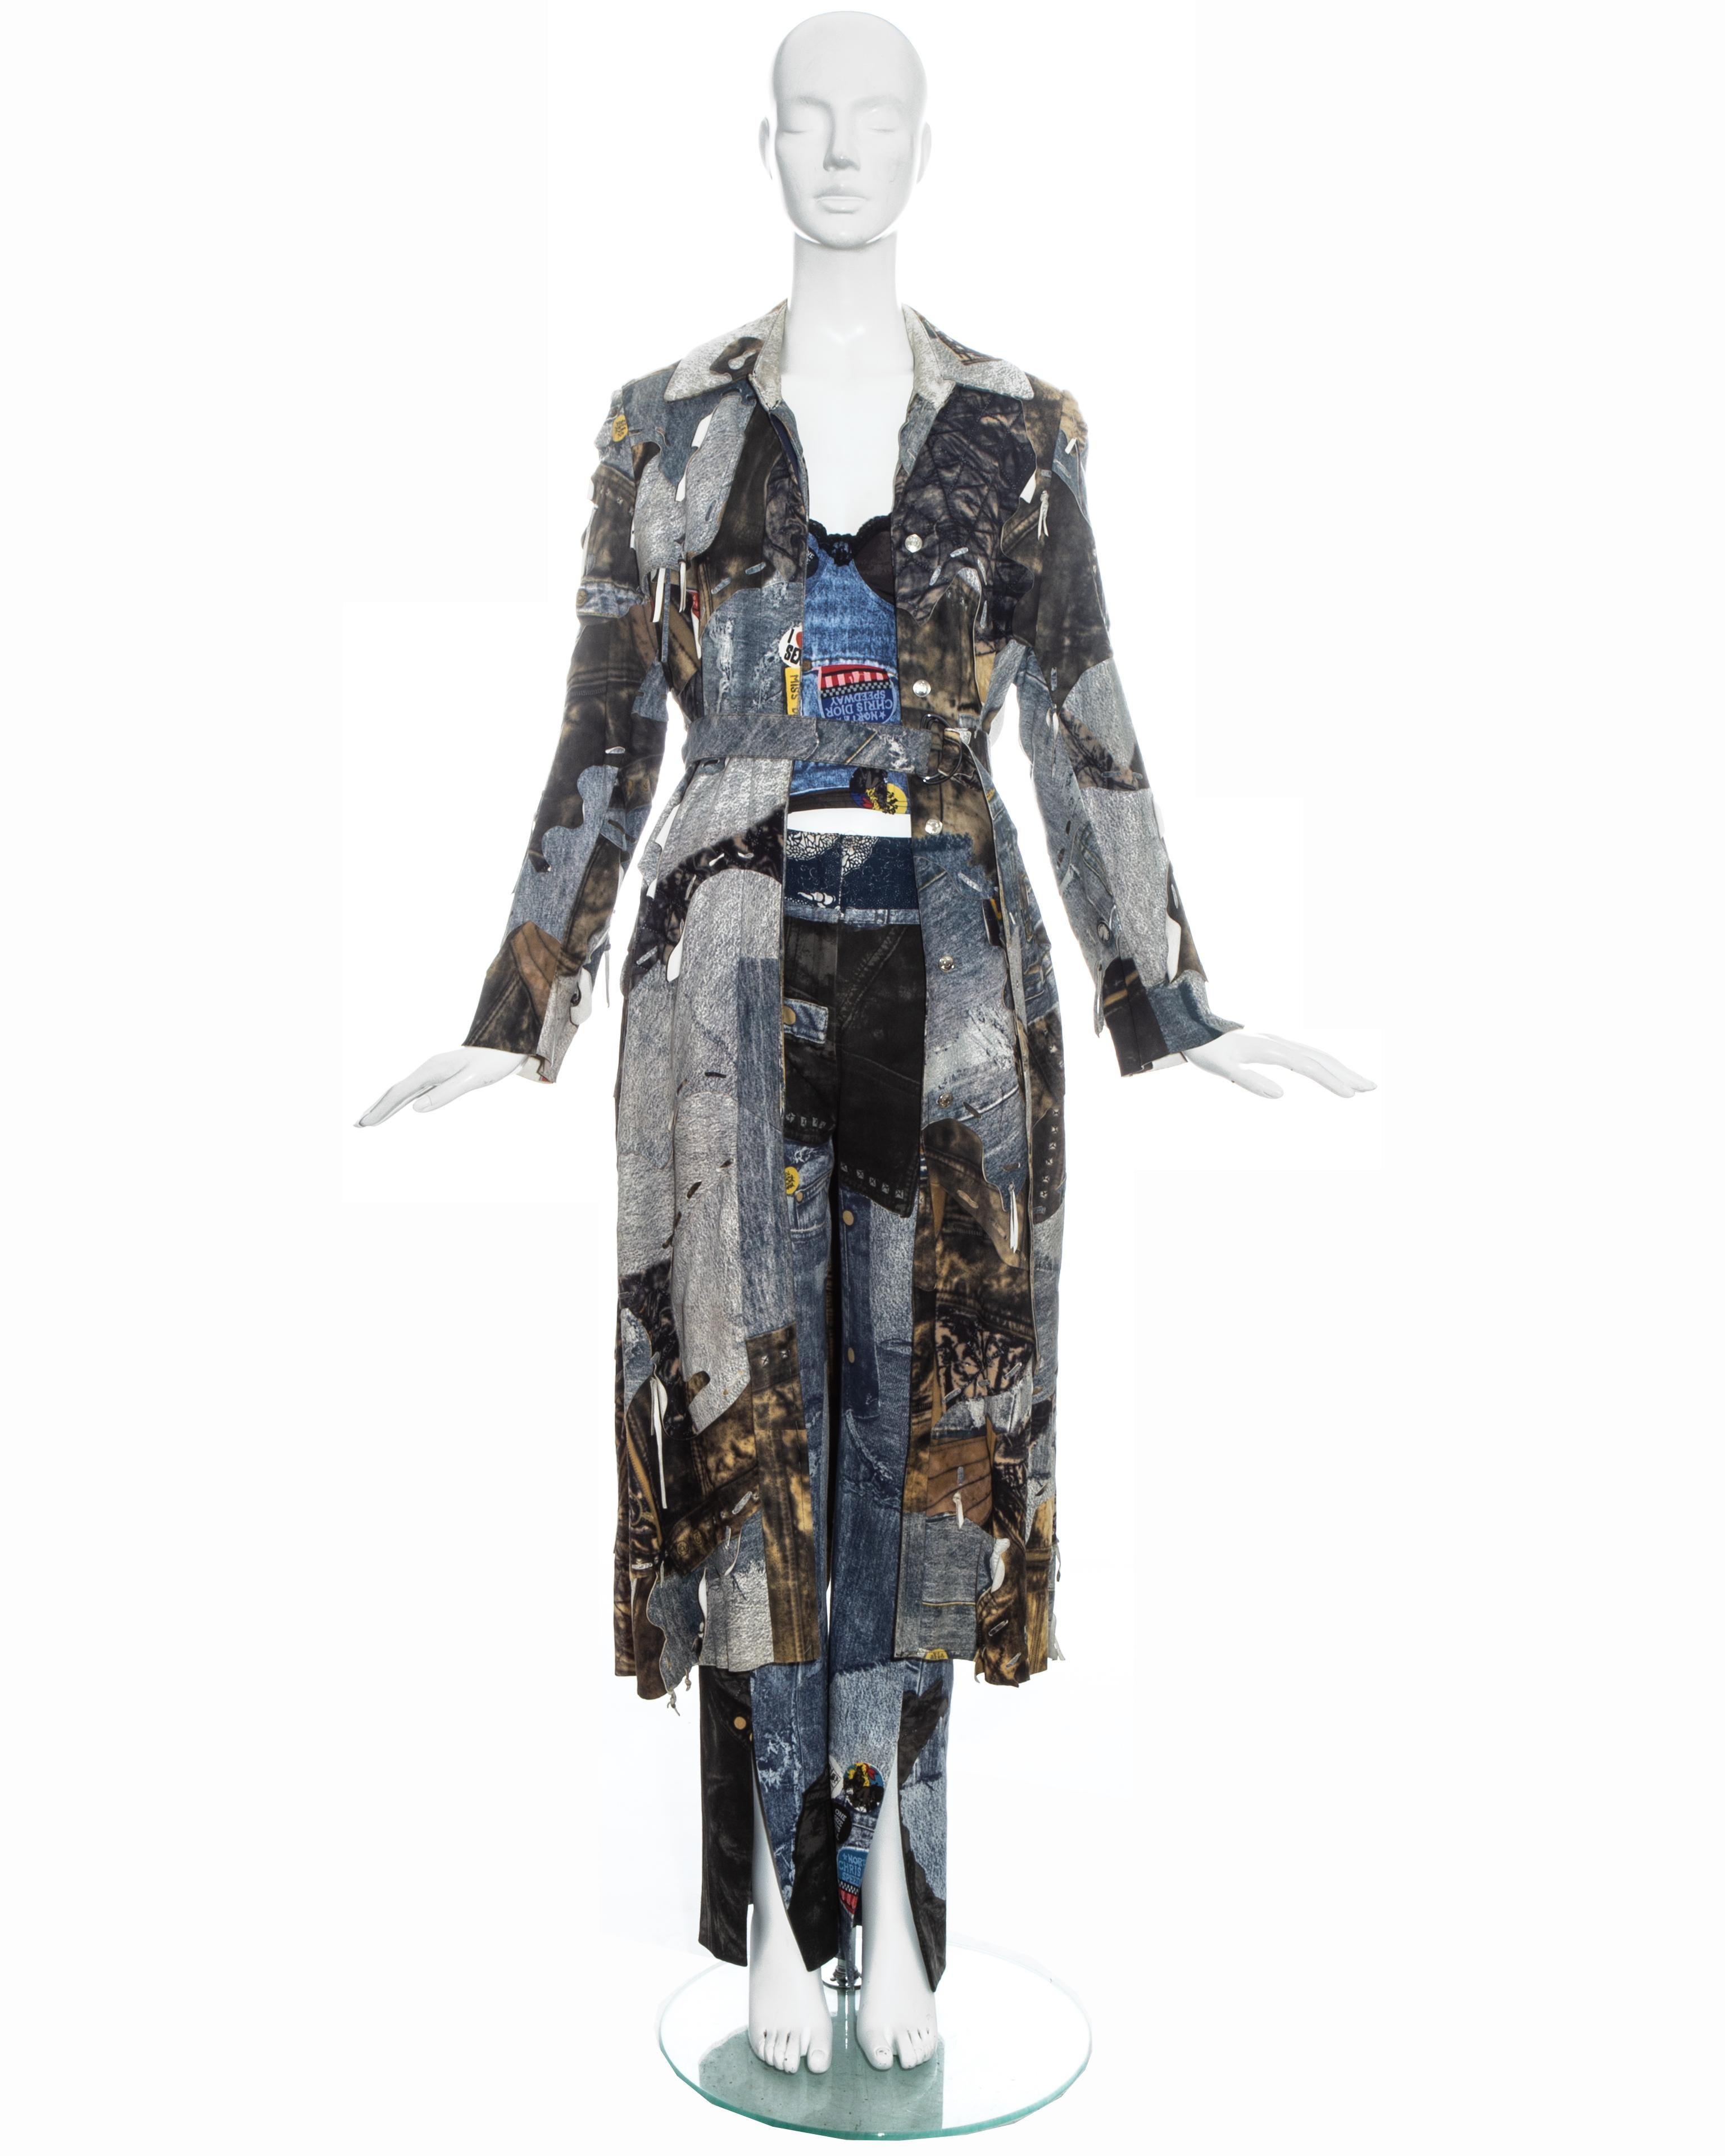 Christian Dior by John Galliano; three piece pant suit comprising: patchwork denim printed velvet suede coat with tassels and stud button closures, matching cotton pants and satin corset

Fall-Winter 2001